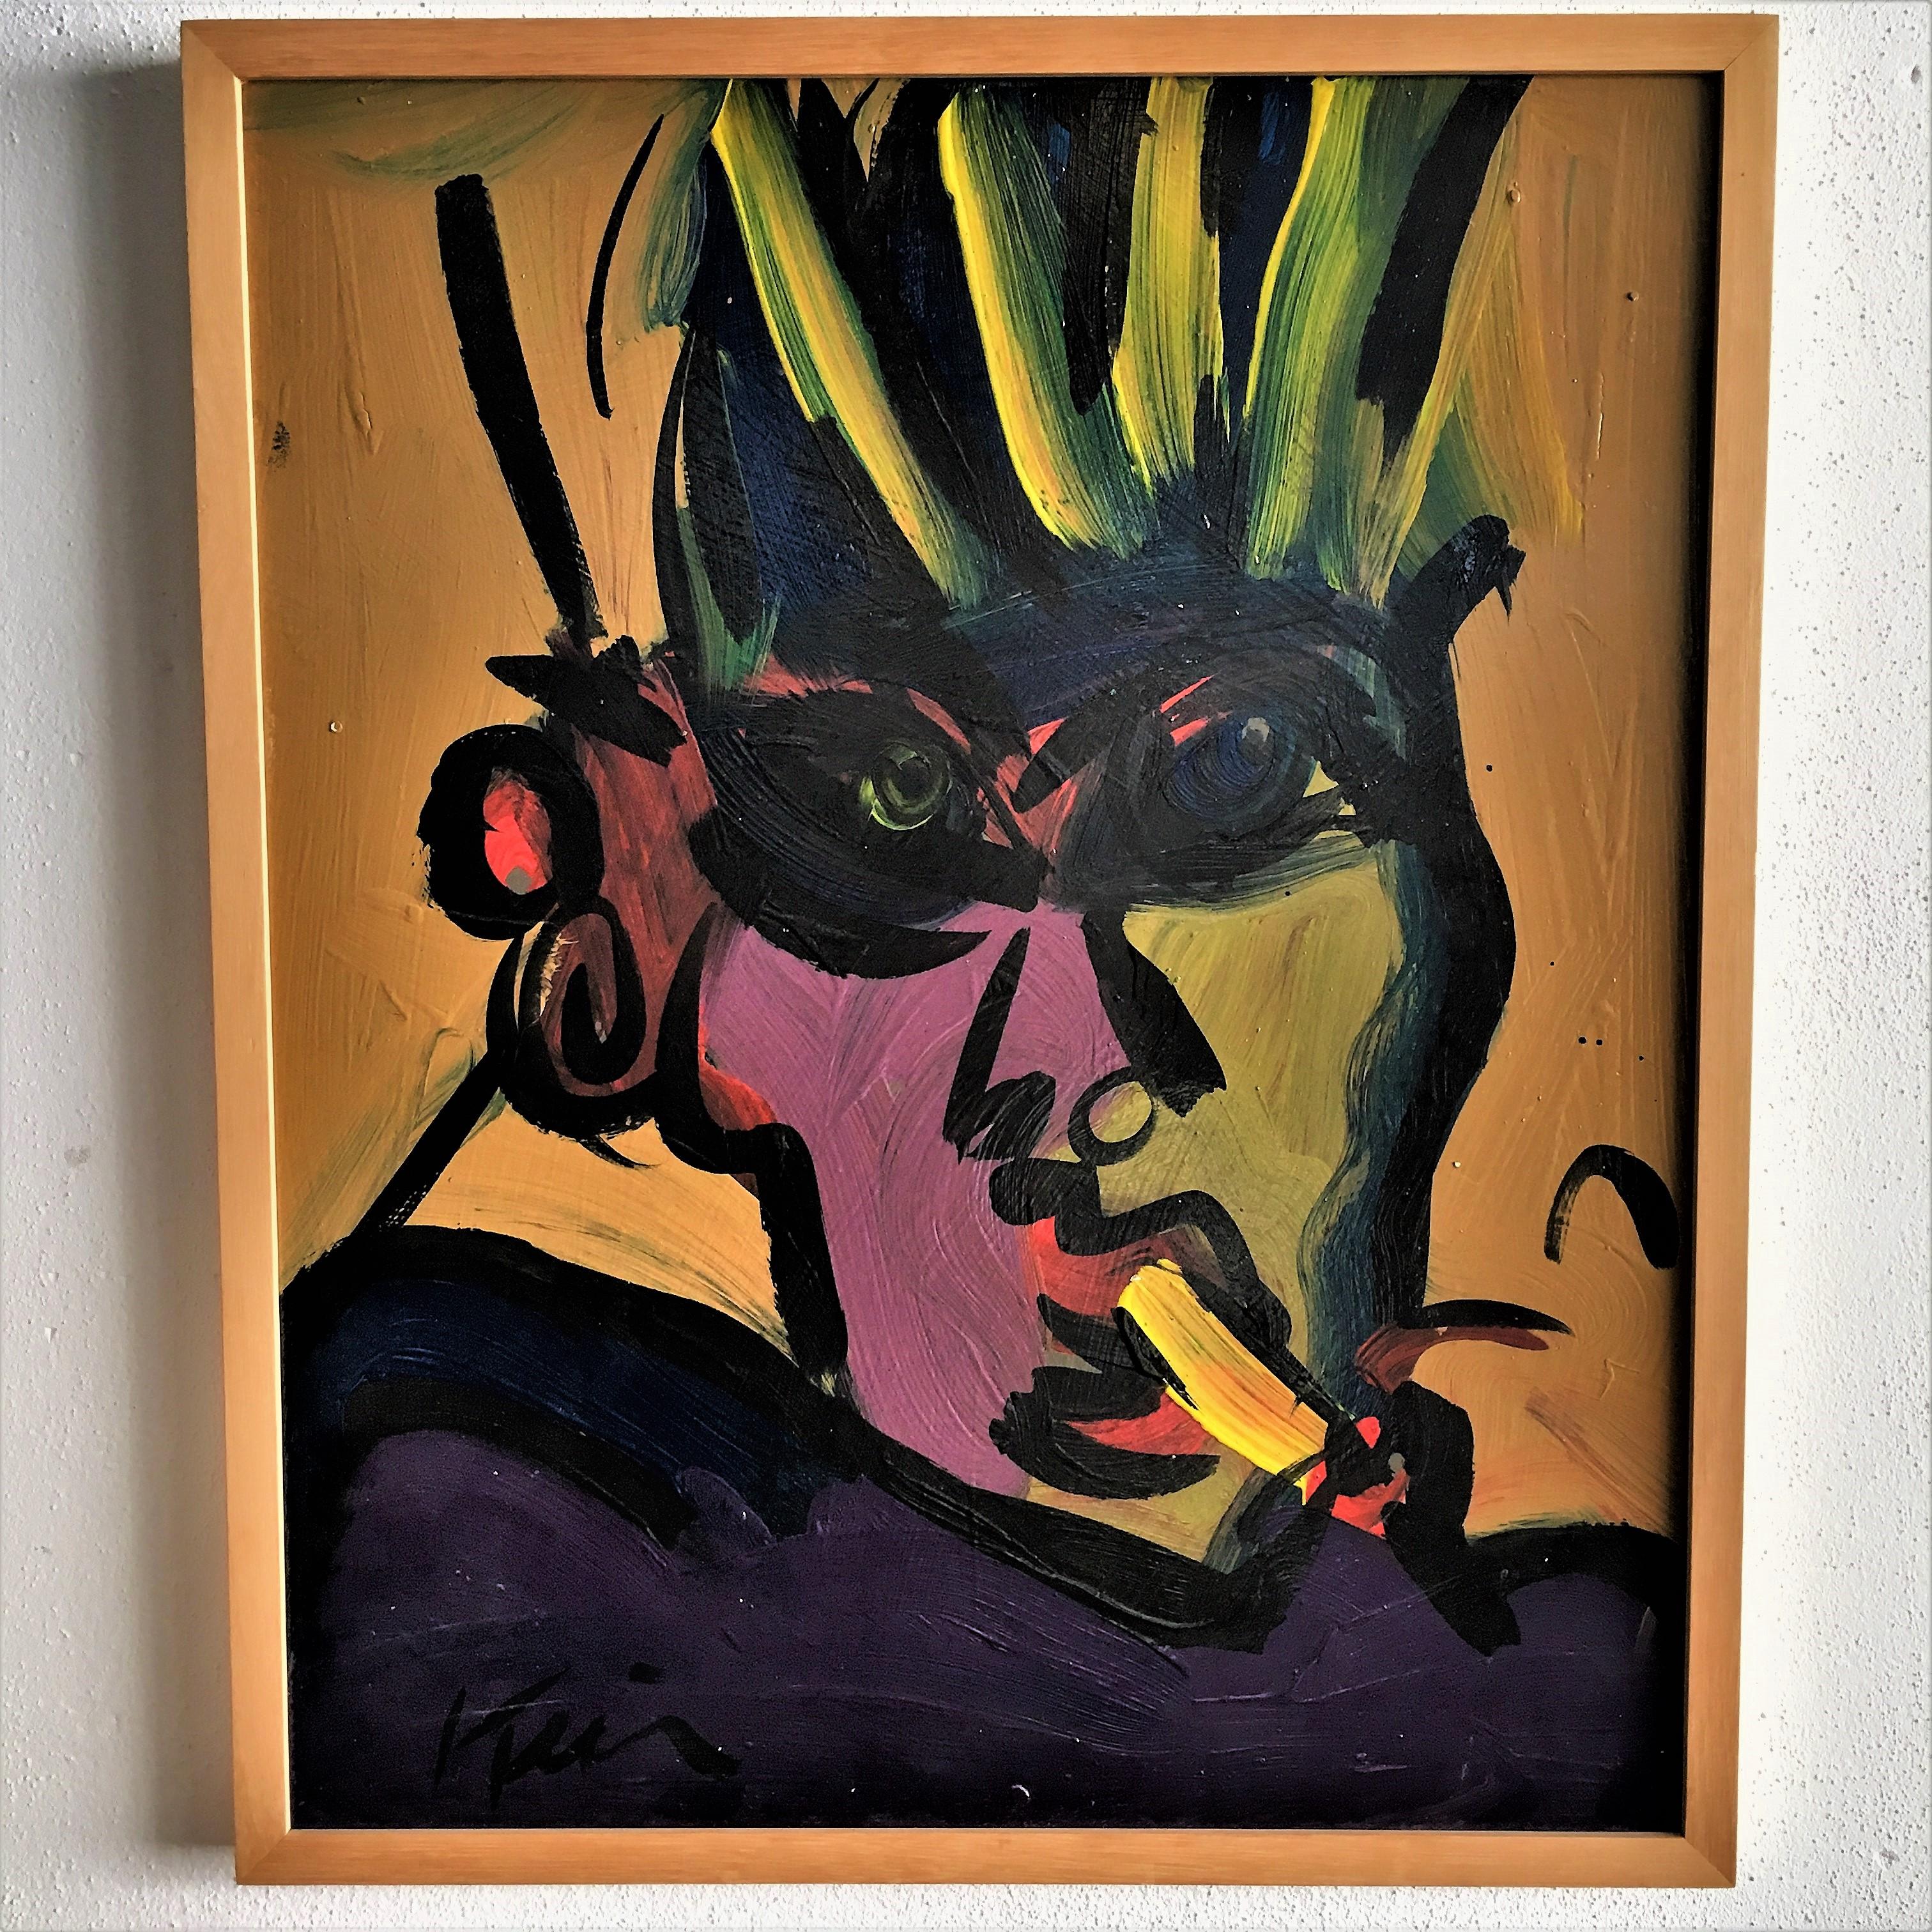 Very dynamic and modern painting with rich colours, natural wooden frame.
Need we say more? This is a very radical expressive work done by a German artist. We have not been able to research the name however it is simple, signed & very powerful!